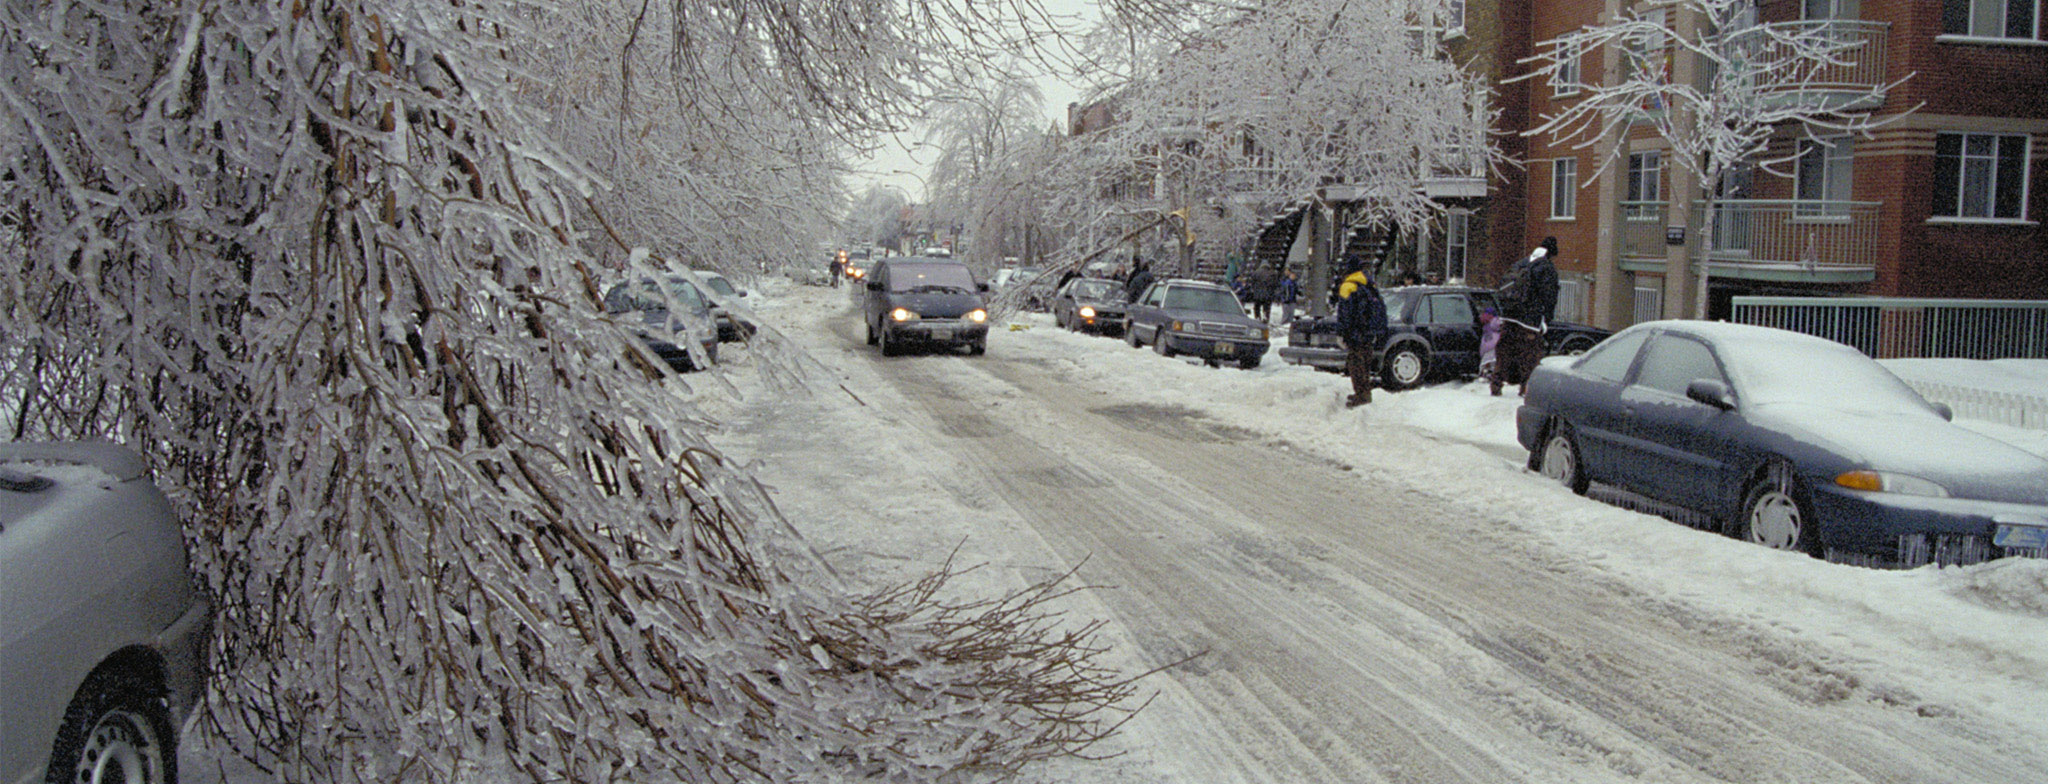 A photograph of a street in Québec during the ice storm. There is frozen rain on all the trees, weighing them down.